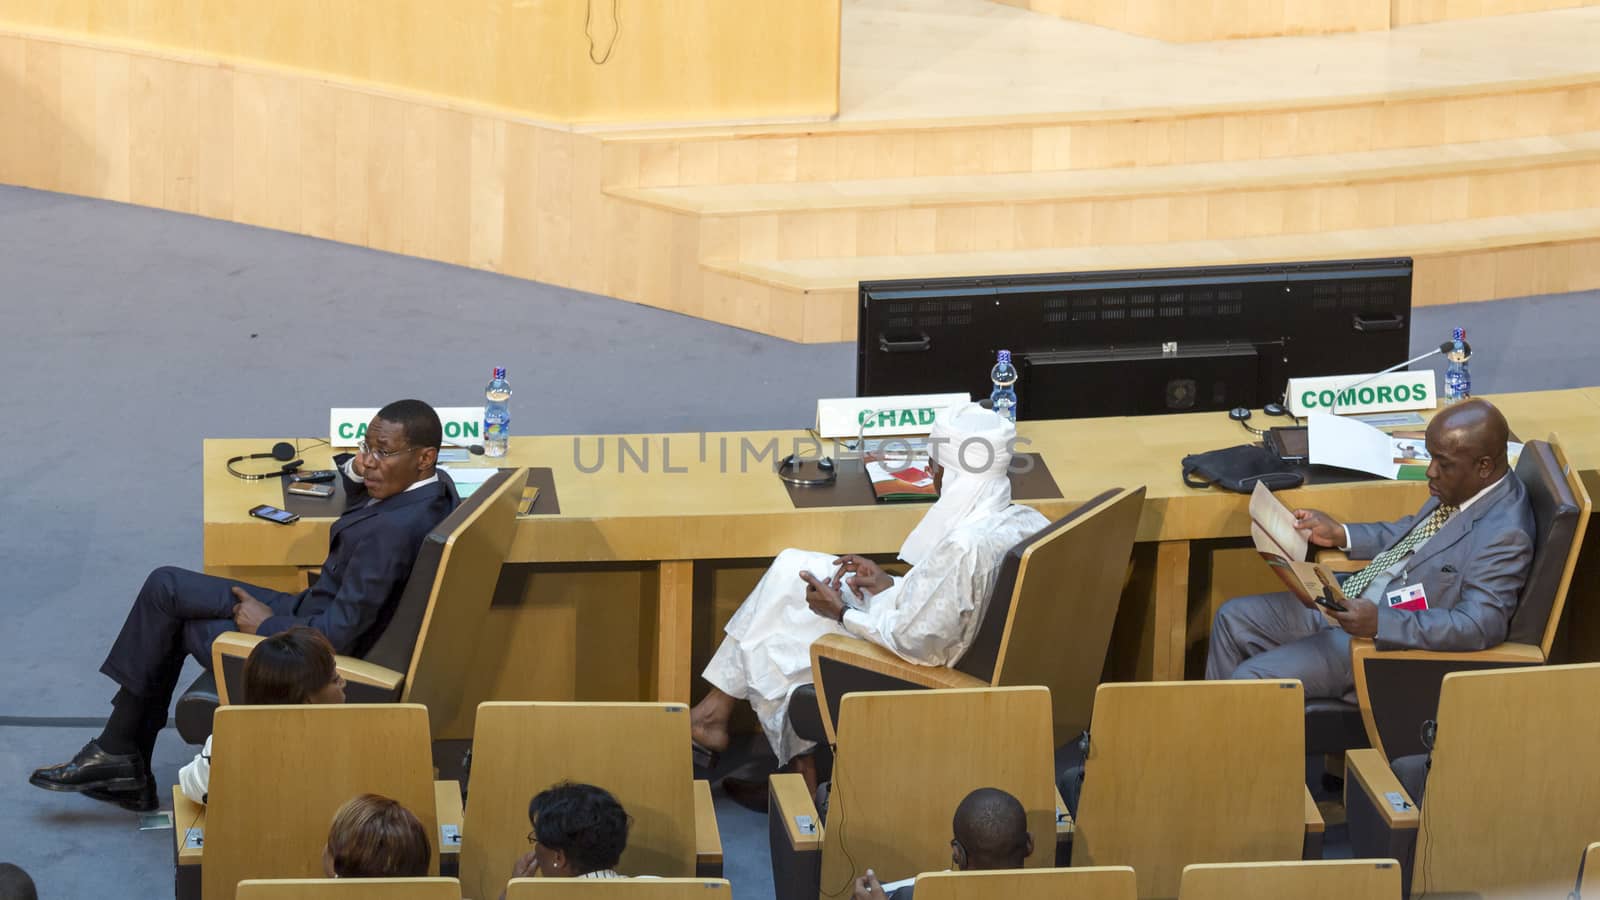 Addis Ababa - July 28: High level delegate of Cameroon, Chad and Comoros await the arrival of President Obama on July 28, 2015, at the AU Conference Centre in Addis Ababa, Ethiopia.